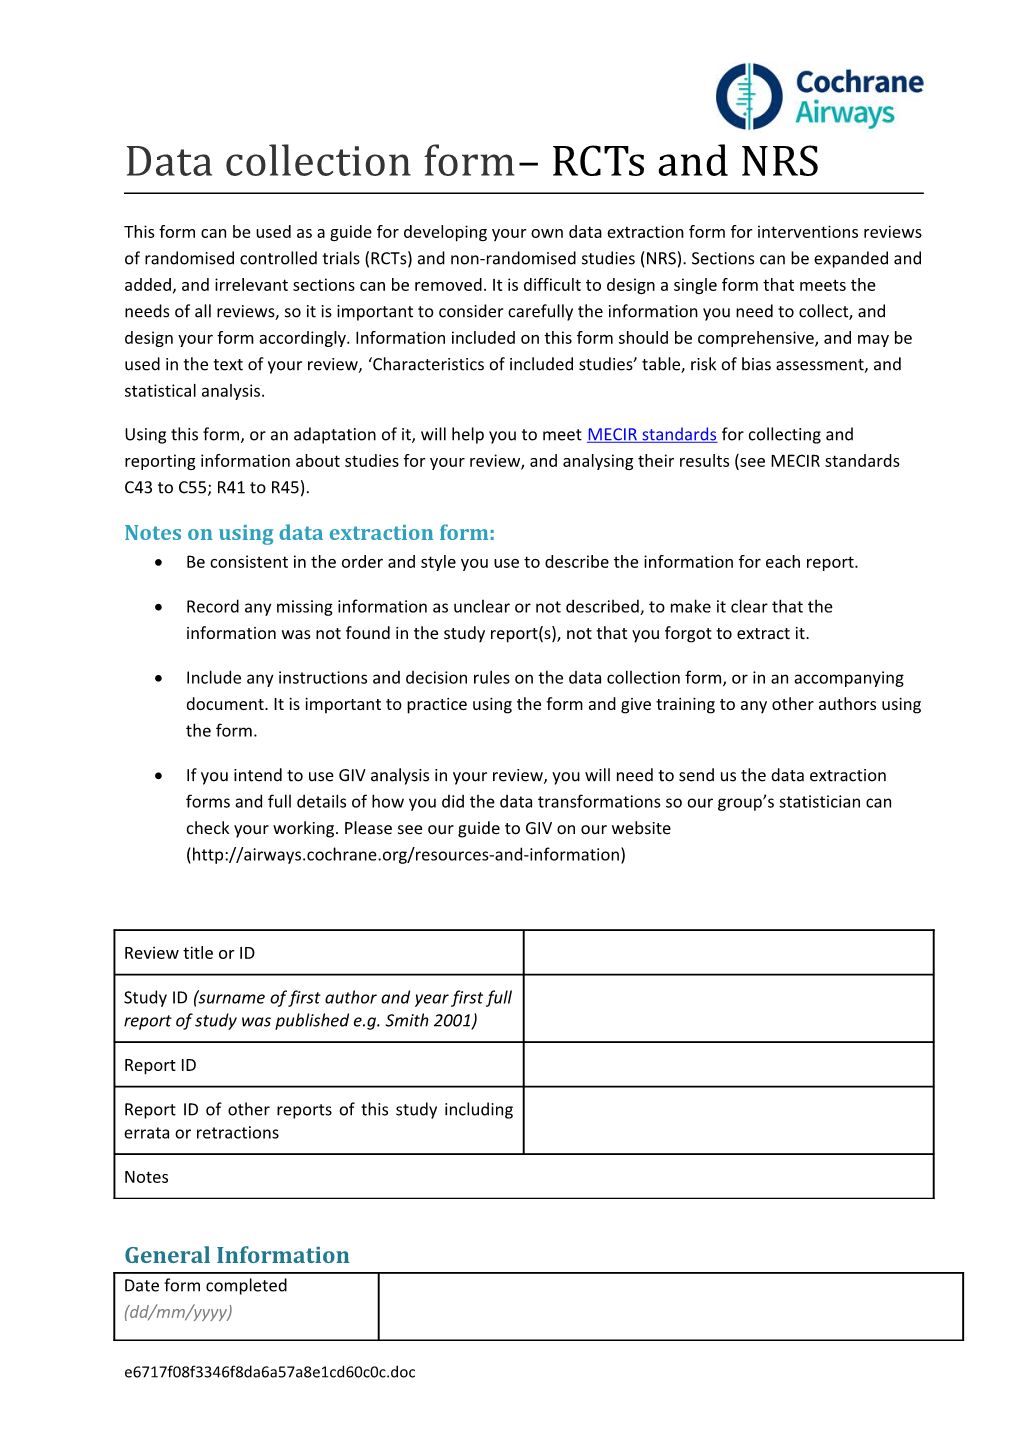 Data Extraction and Assessment Form - Template